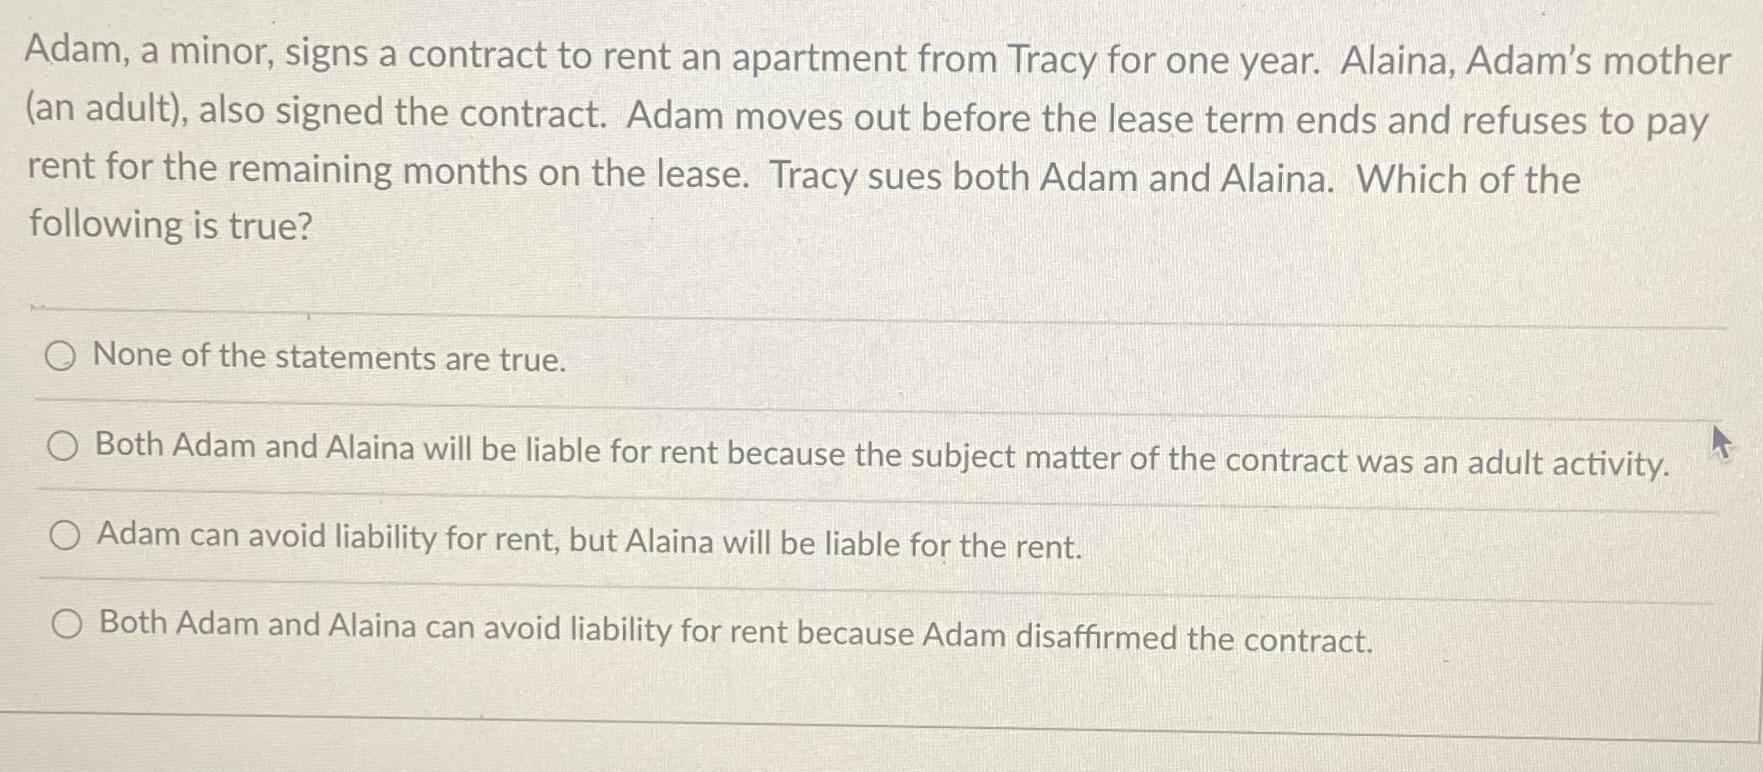 Adam, a minor, signs a contract to rent an apartment from Tracy for one year. Alaina, Adam's mother (an